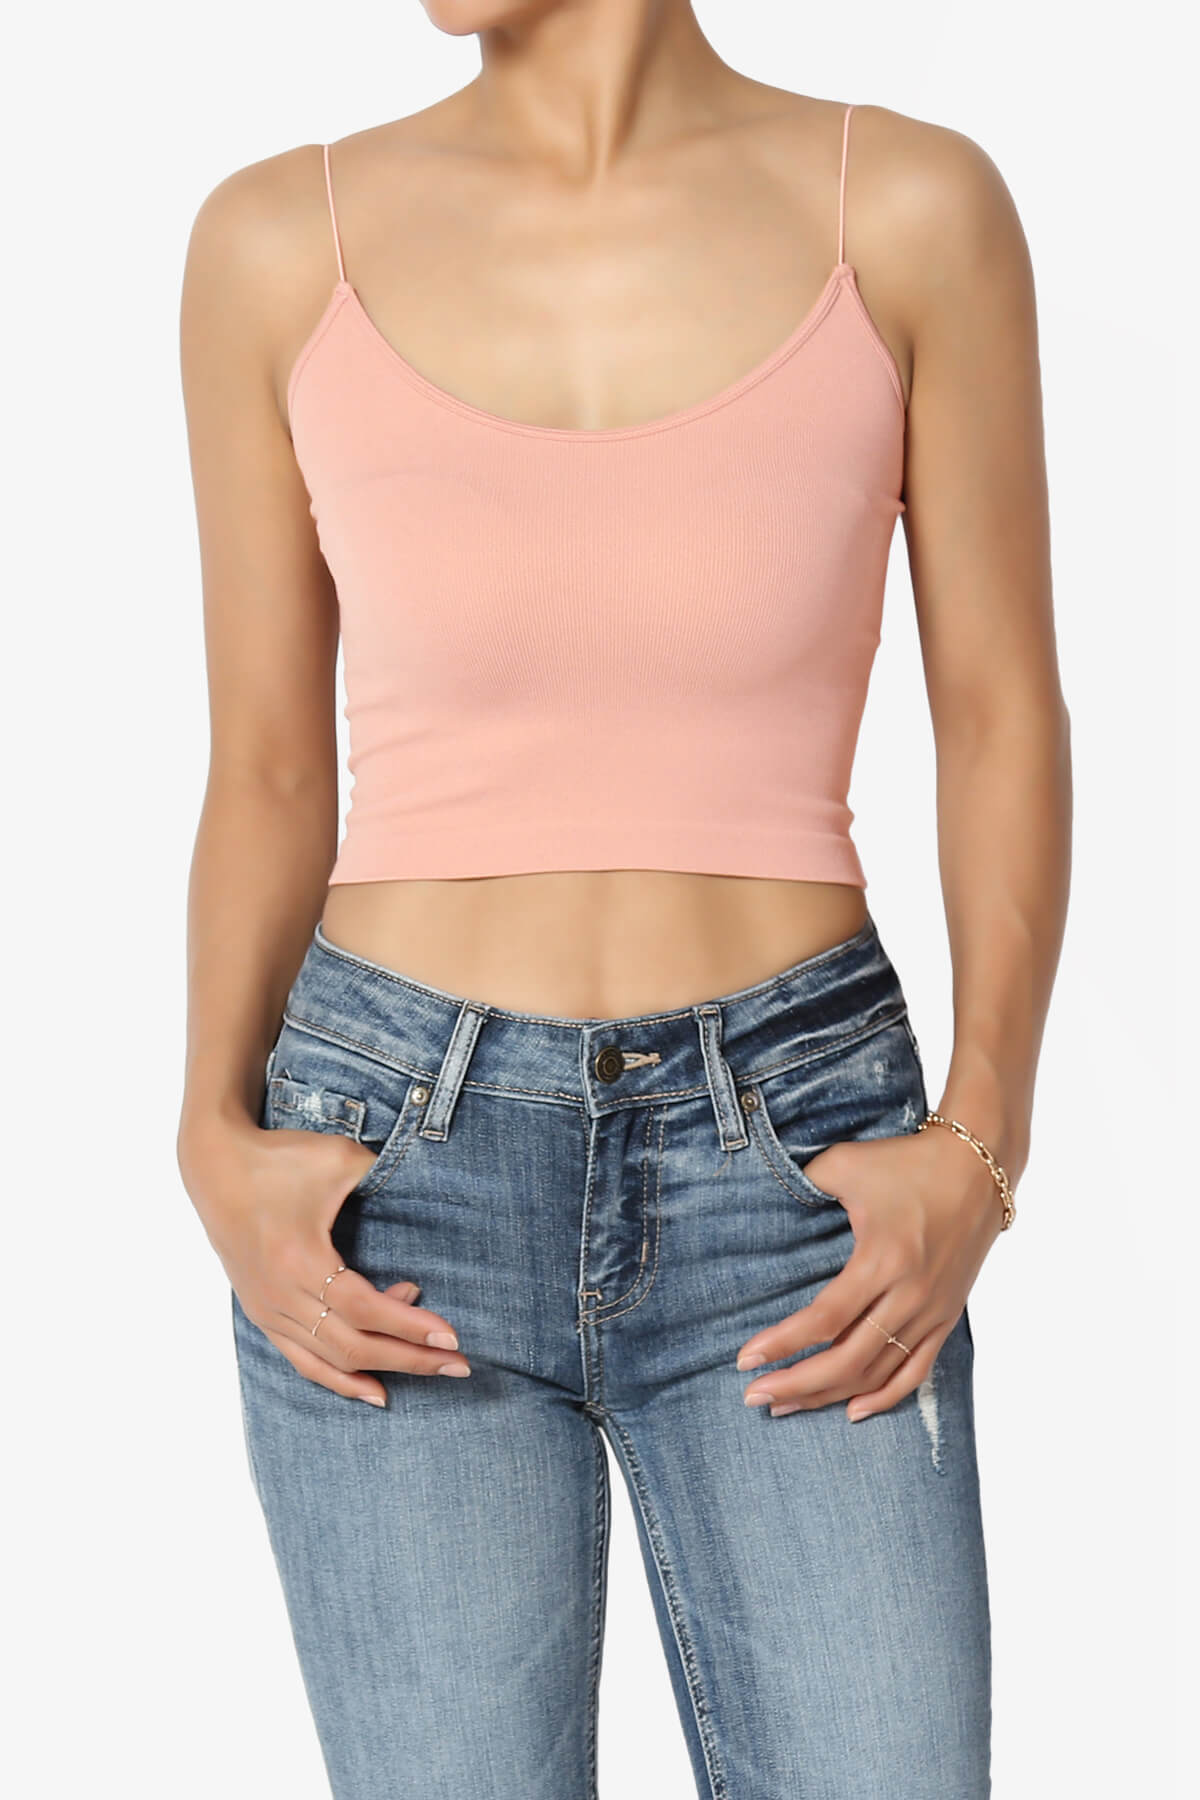 Women's Ribbed Cami Crop Tops Cropped Camisole with Built in Bra